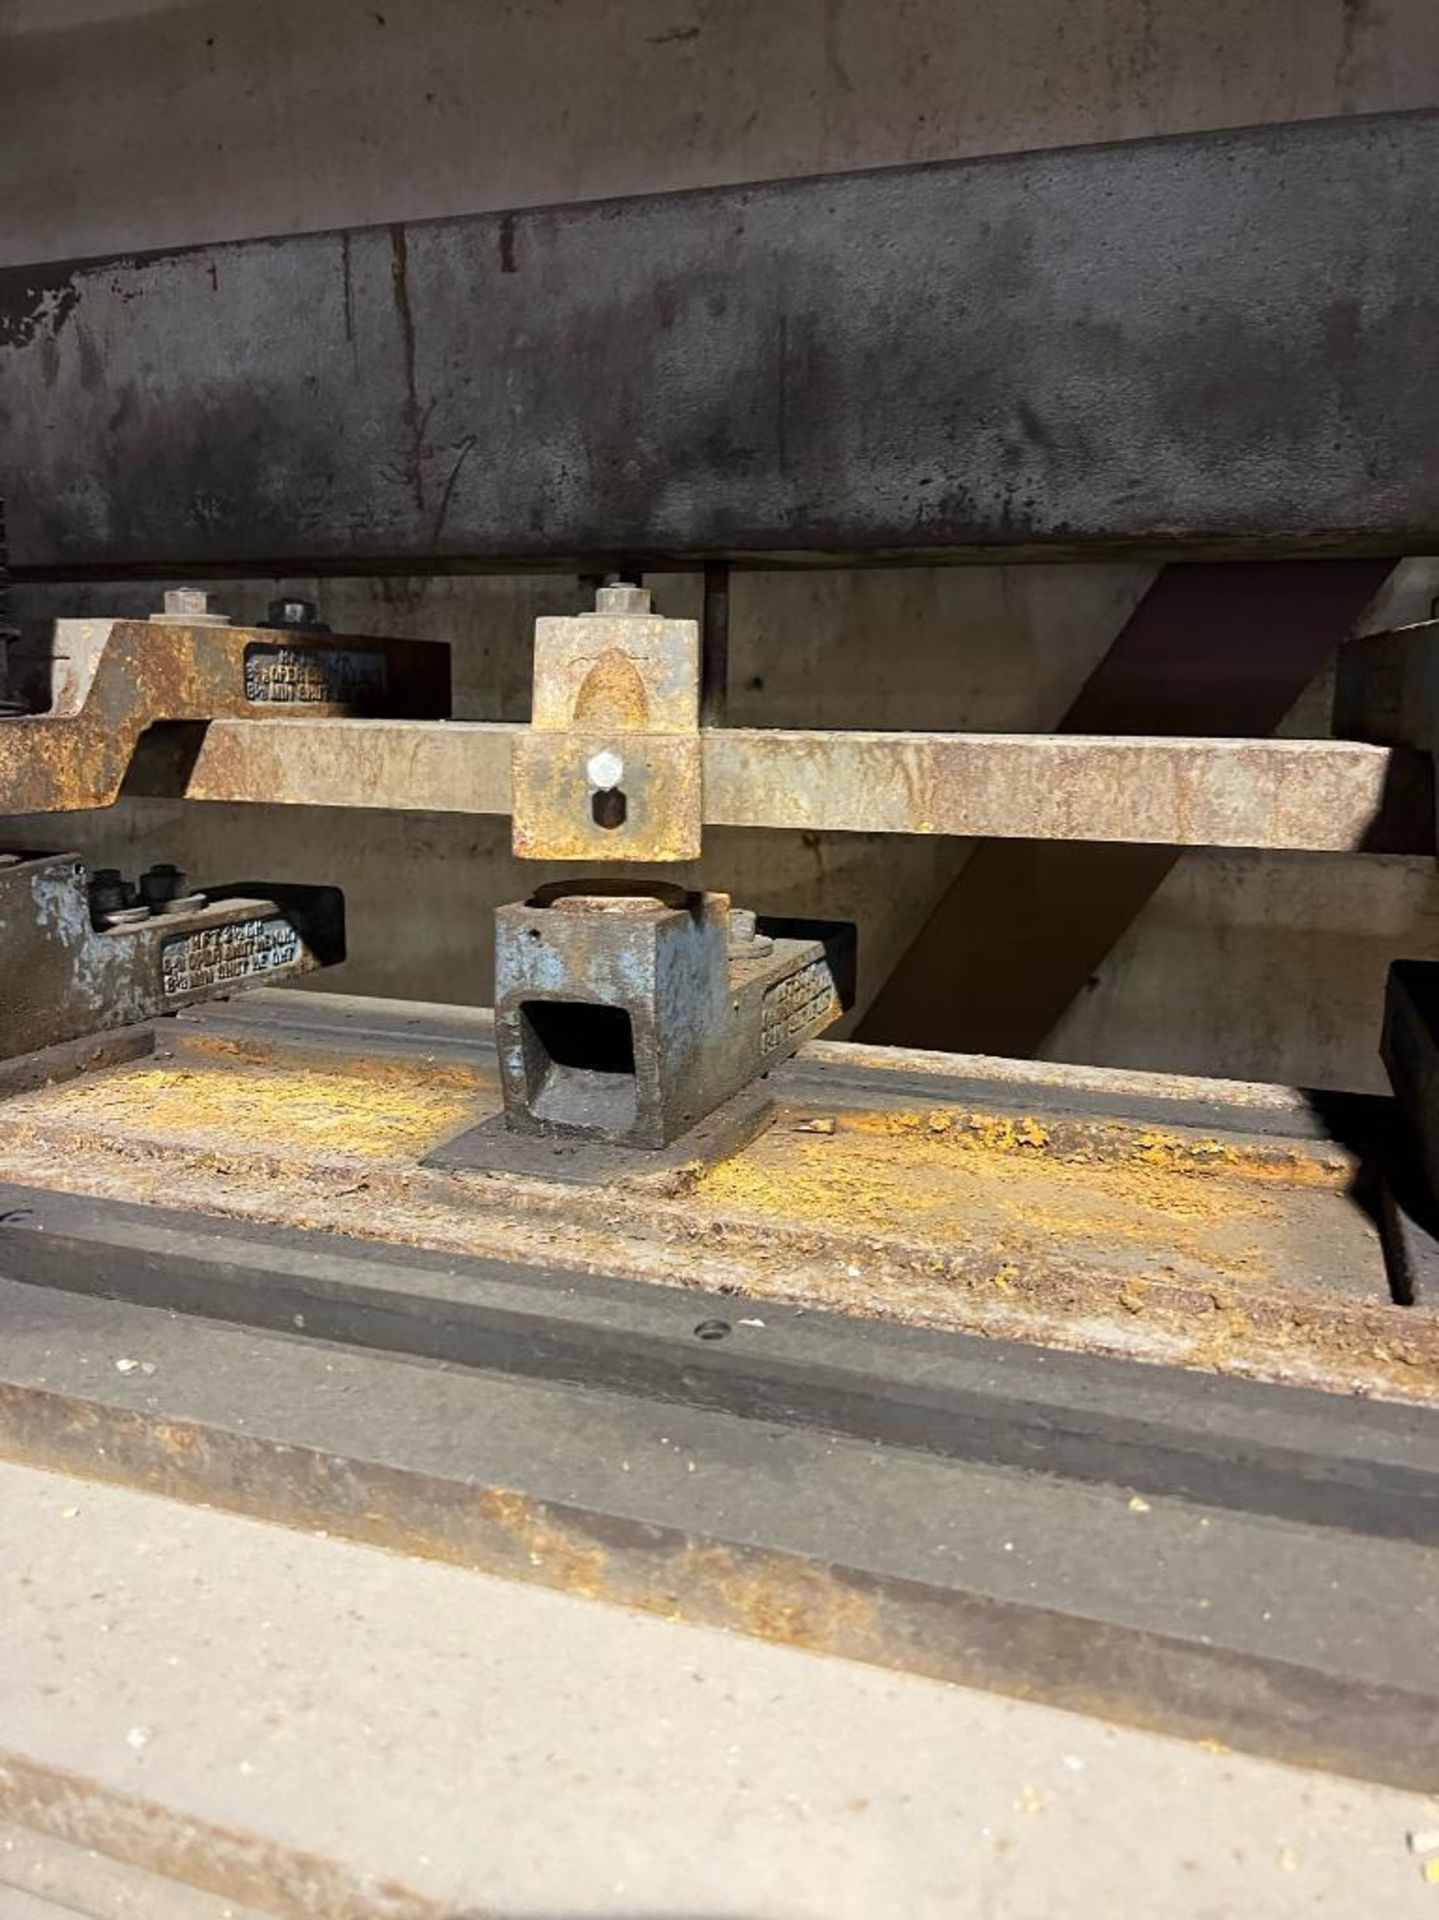 Hole Piercing Unit Pass Through for Press Brake - Image 3 of 4